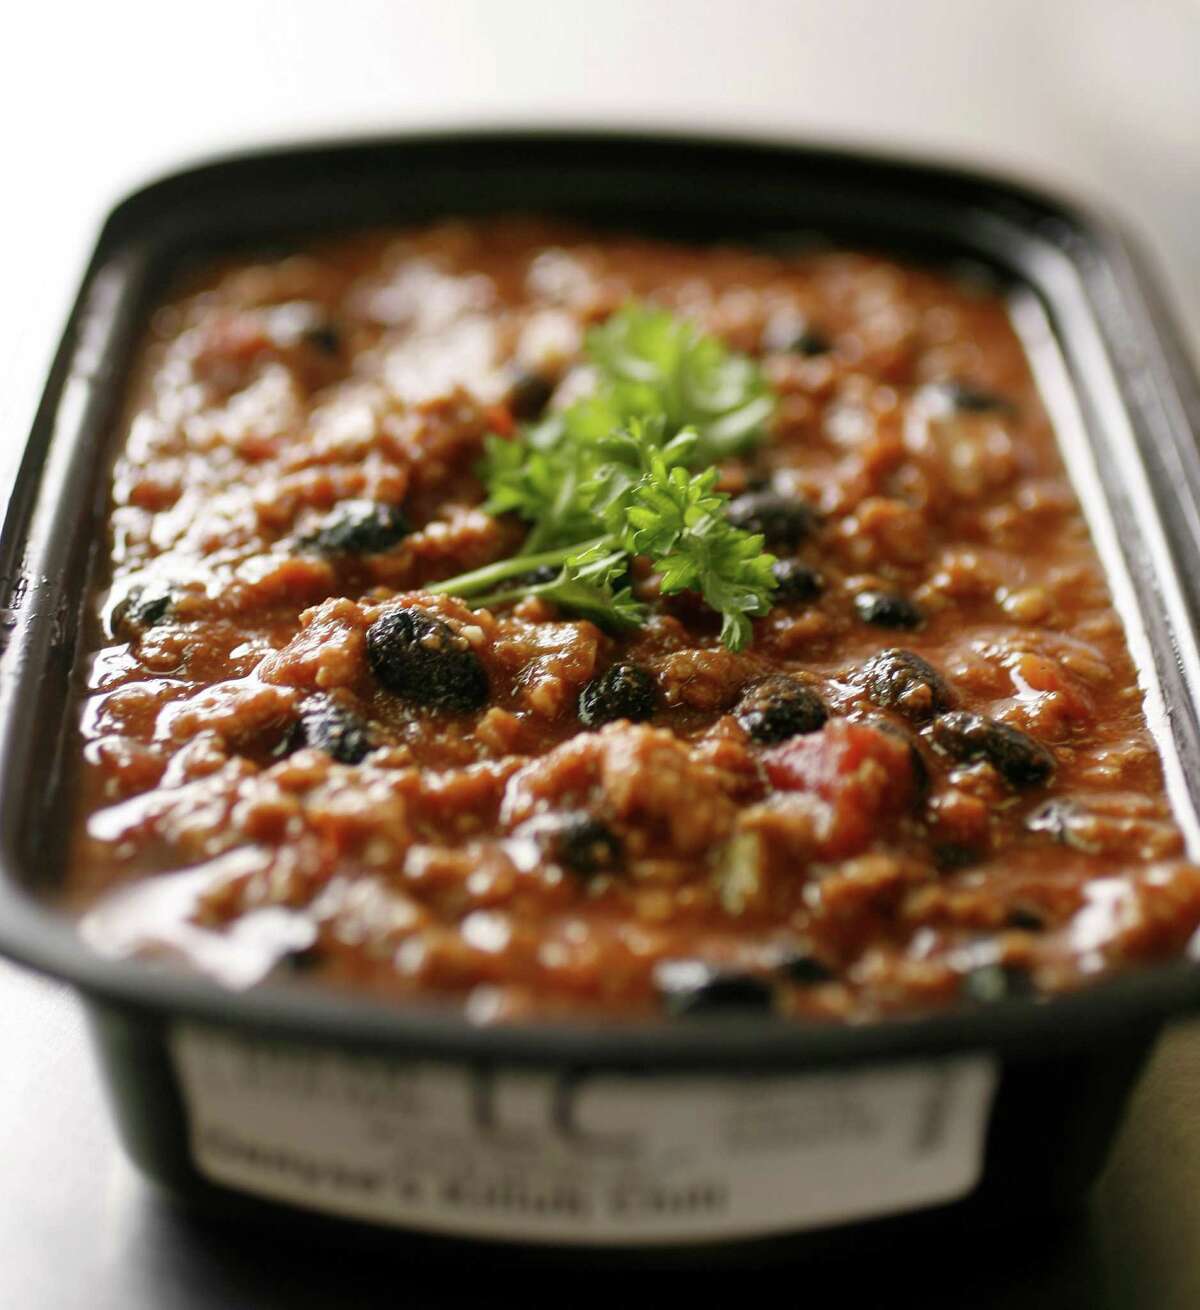 “Denyse’s Killuh Chili” was one of the dishes offered at My Fit Foods. The company operated more than 50 stores in five states before closing this weekend, according to its website.